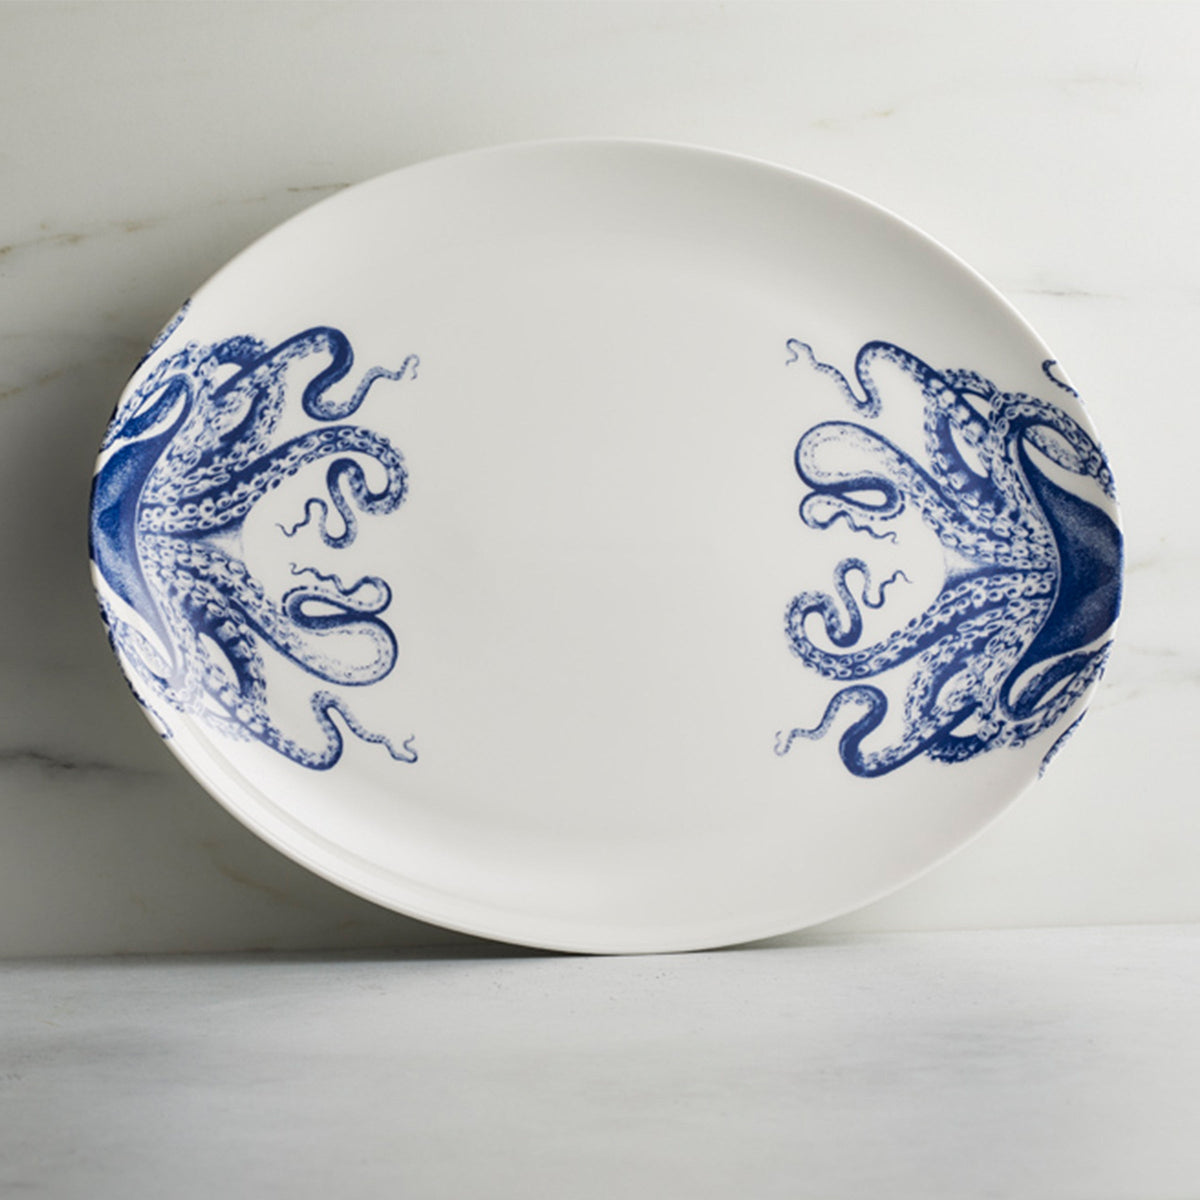 Lucy Medium Coupe Platter is a creamy white porcelain platter adorned with blue octopi wrapping around the sides.